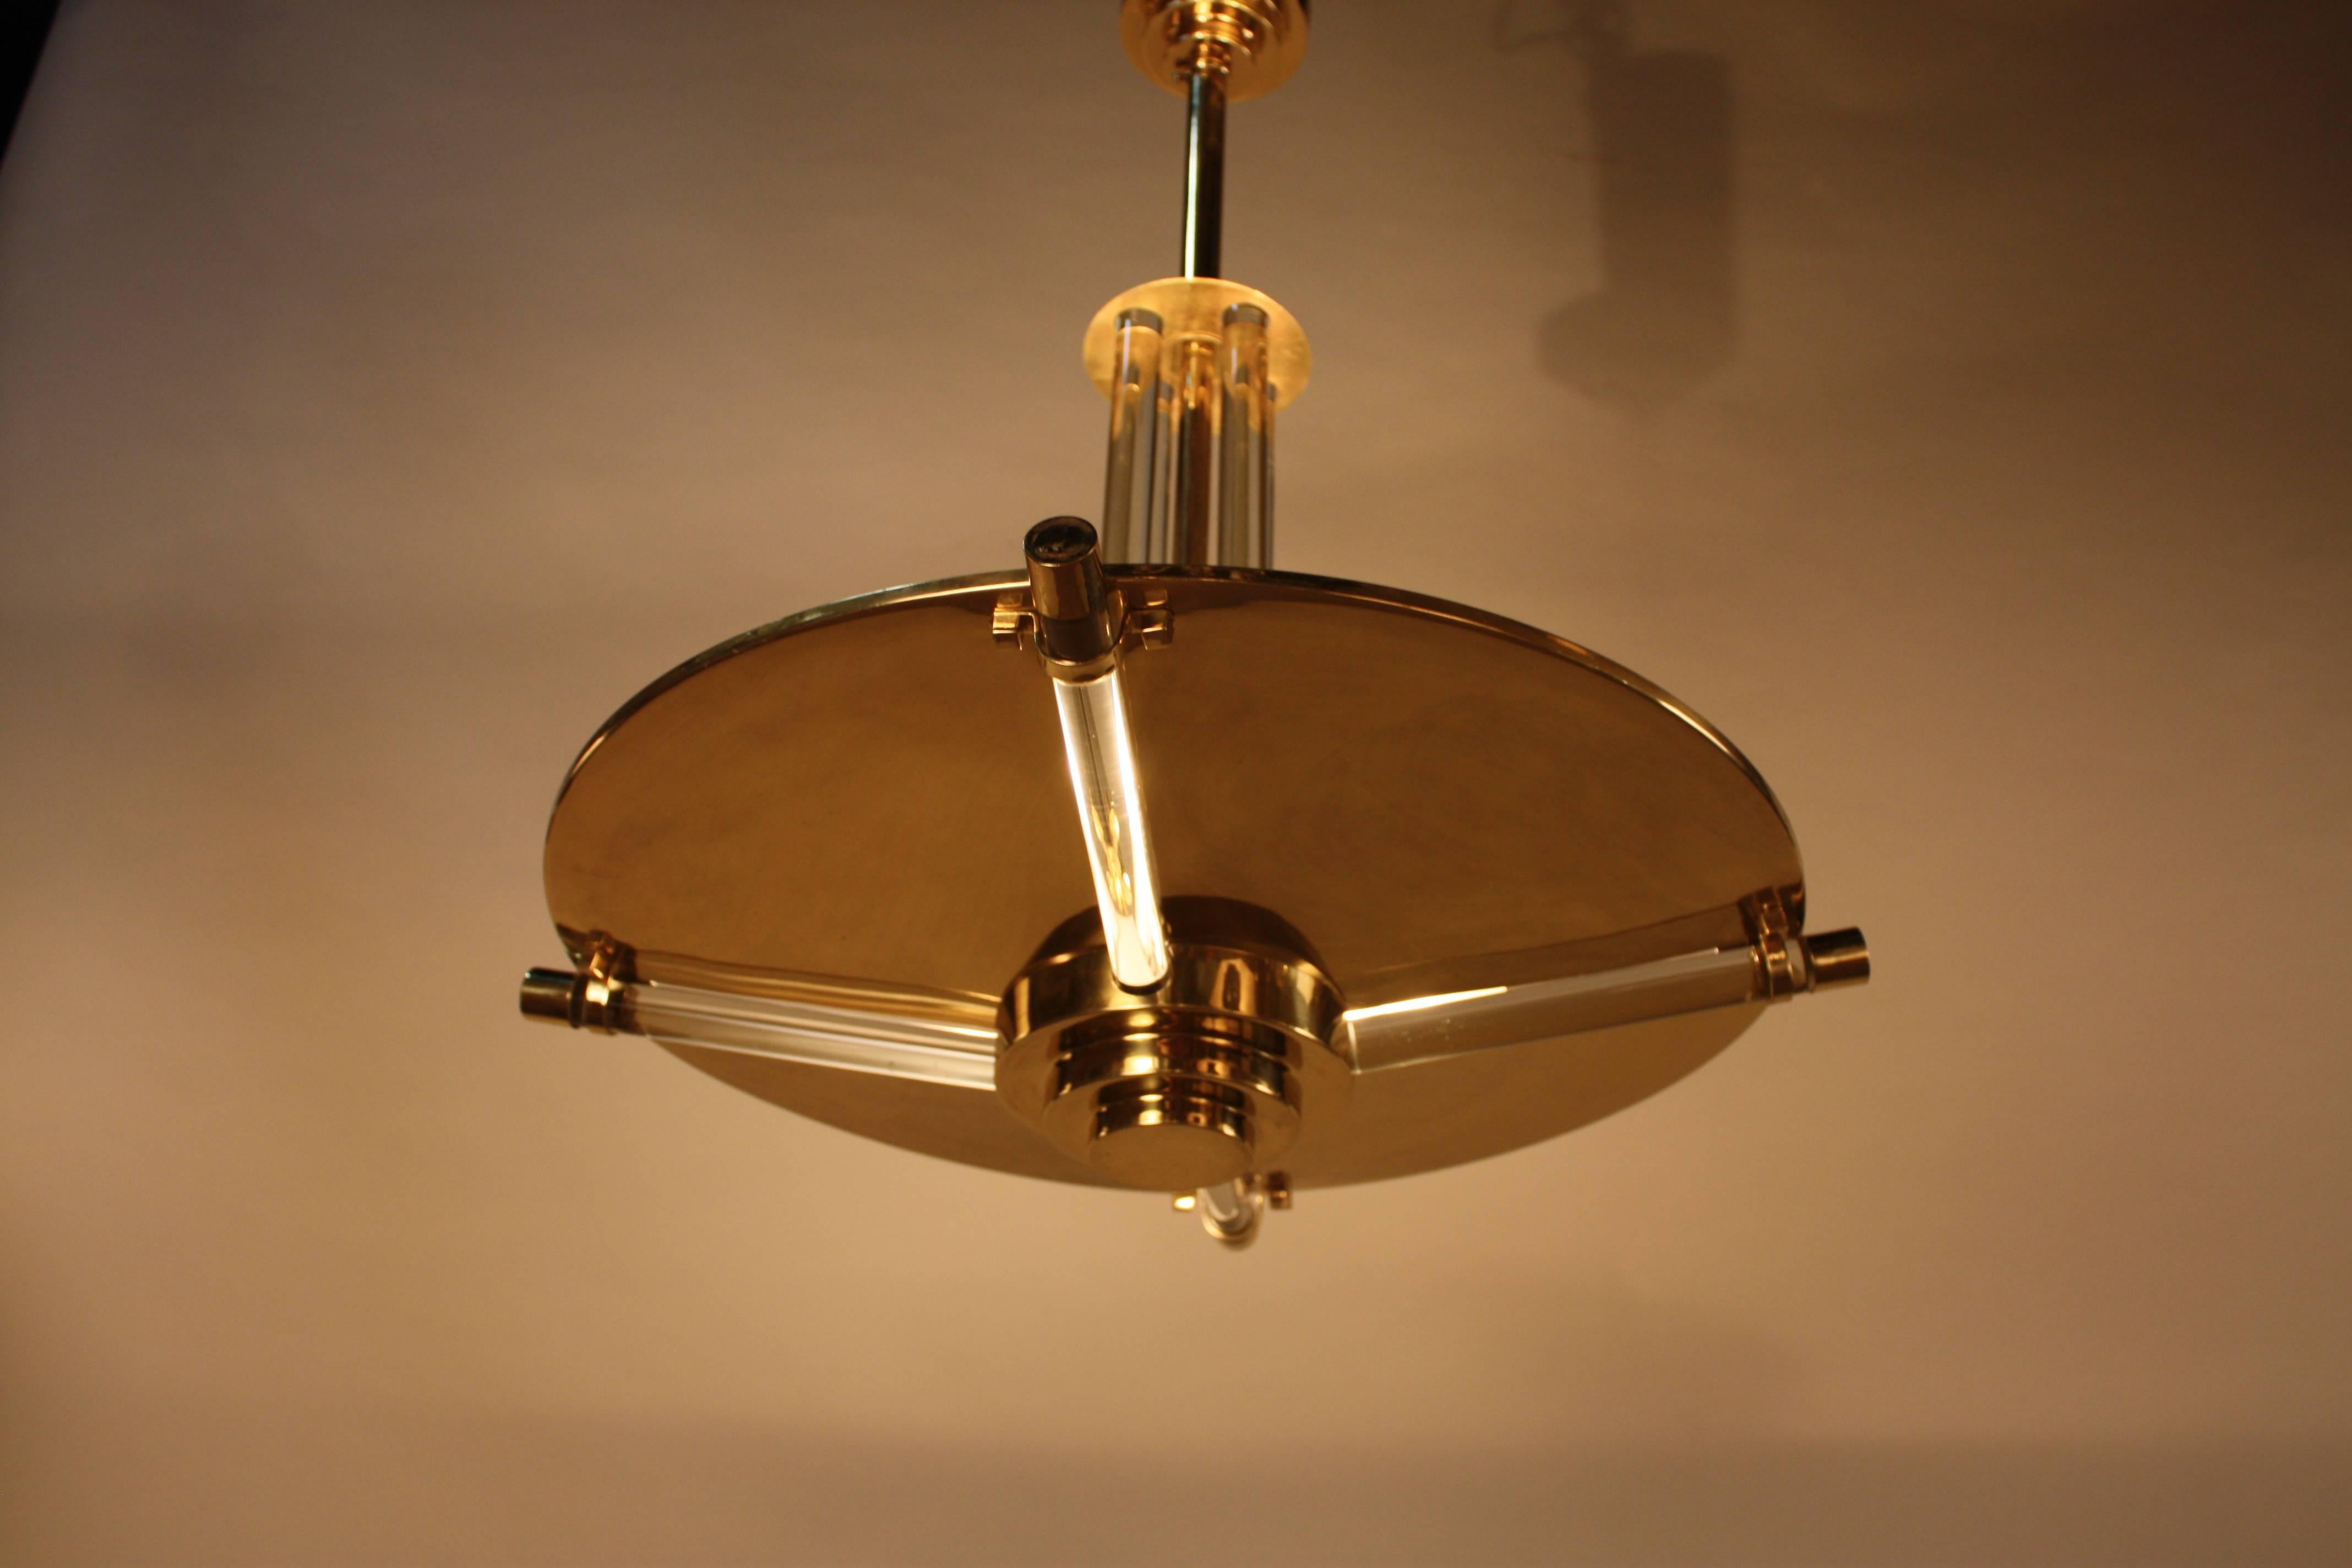 Simple but elegant, combination of bronze and glass rods chandelier. Cut in the large disc allows light to shine through glass rods.
Eight lights, 60watts each.